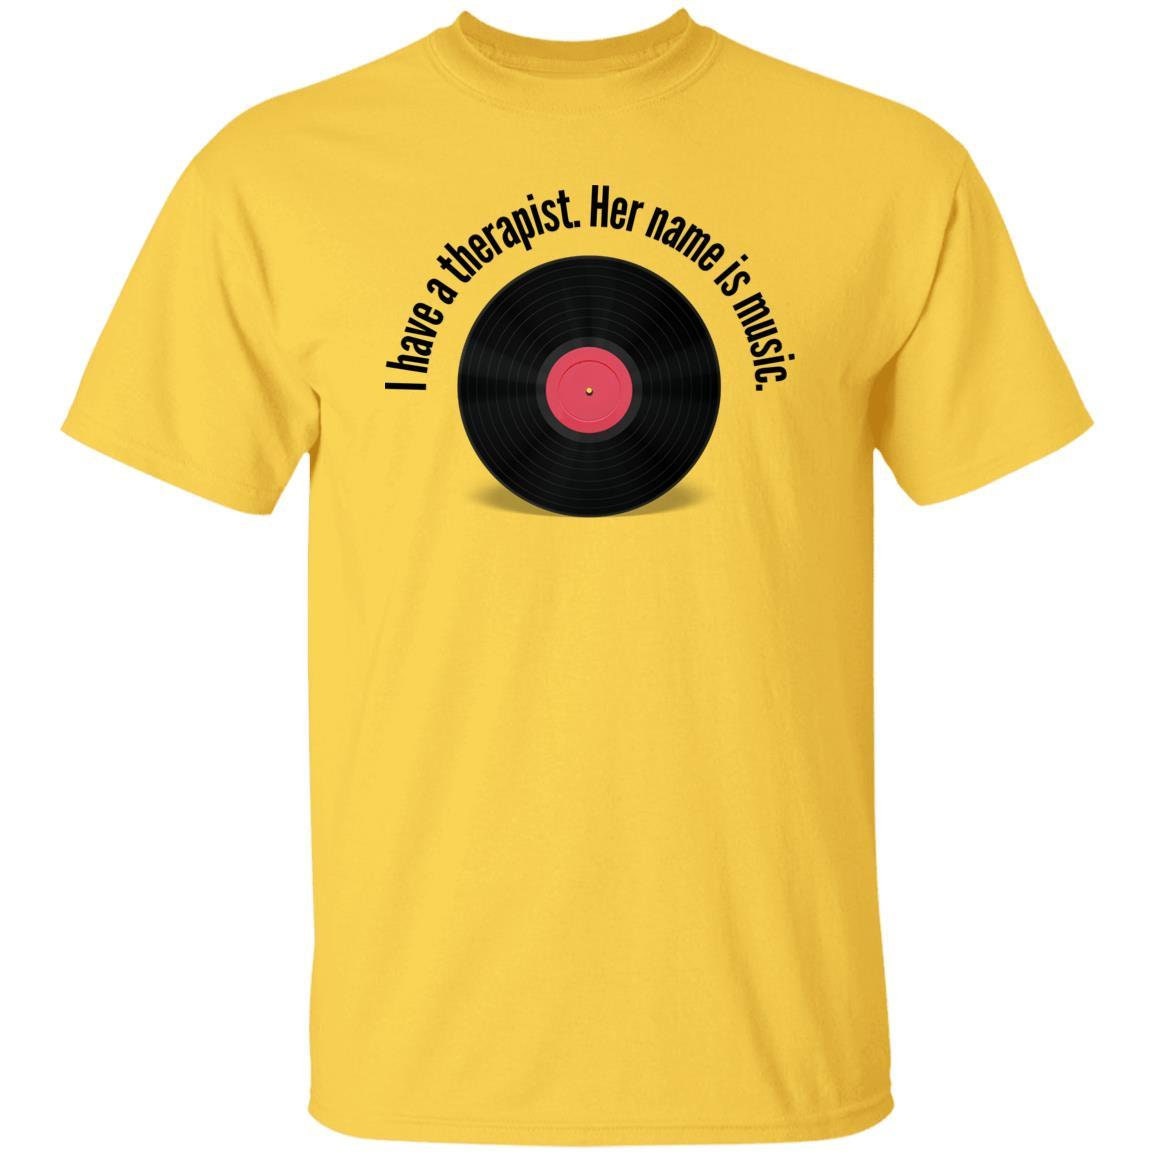 I have a therapist. Her name is music. T-Shirt